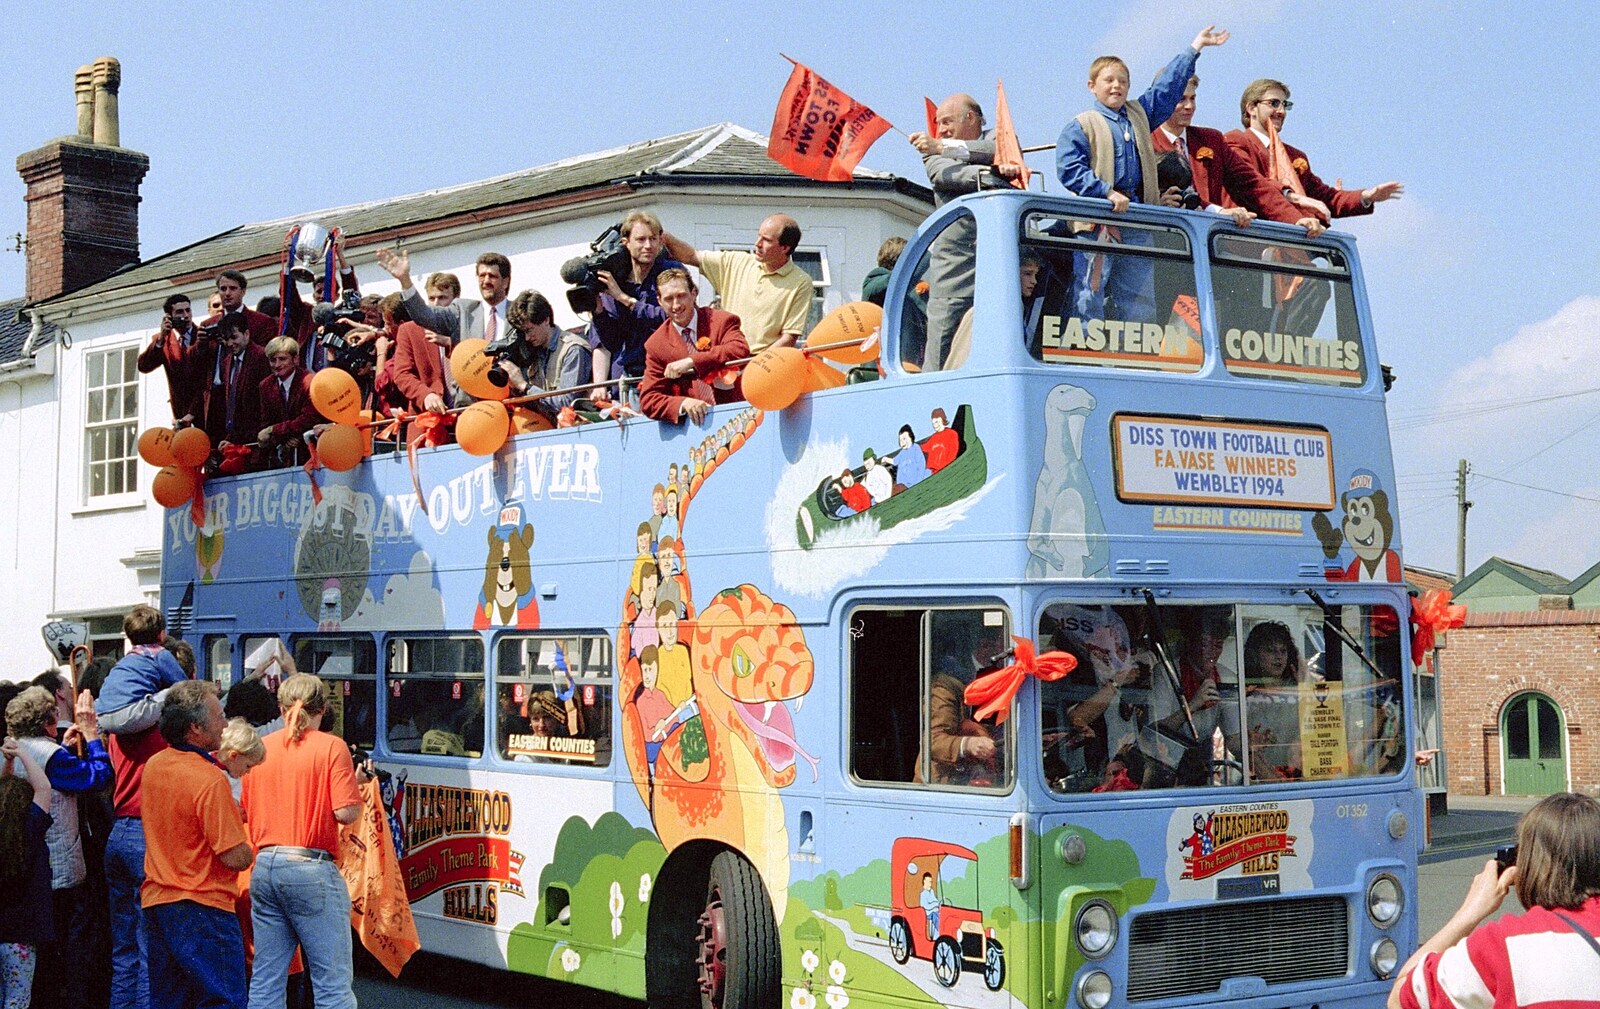 The bus turns down Denmark Street from Diss Town and the F.A. Vase Final, Diss and Wembley, Norfolk and London - 15th May 1994